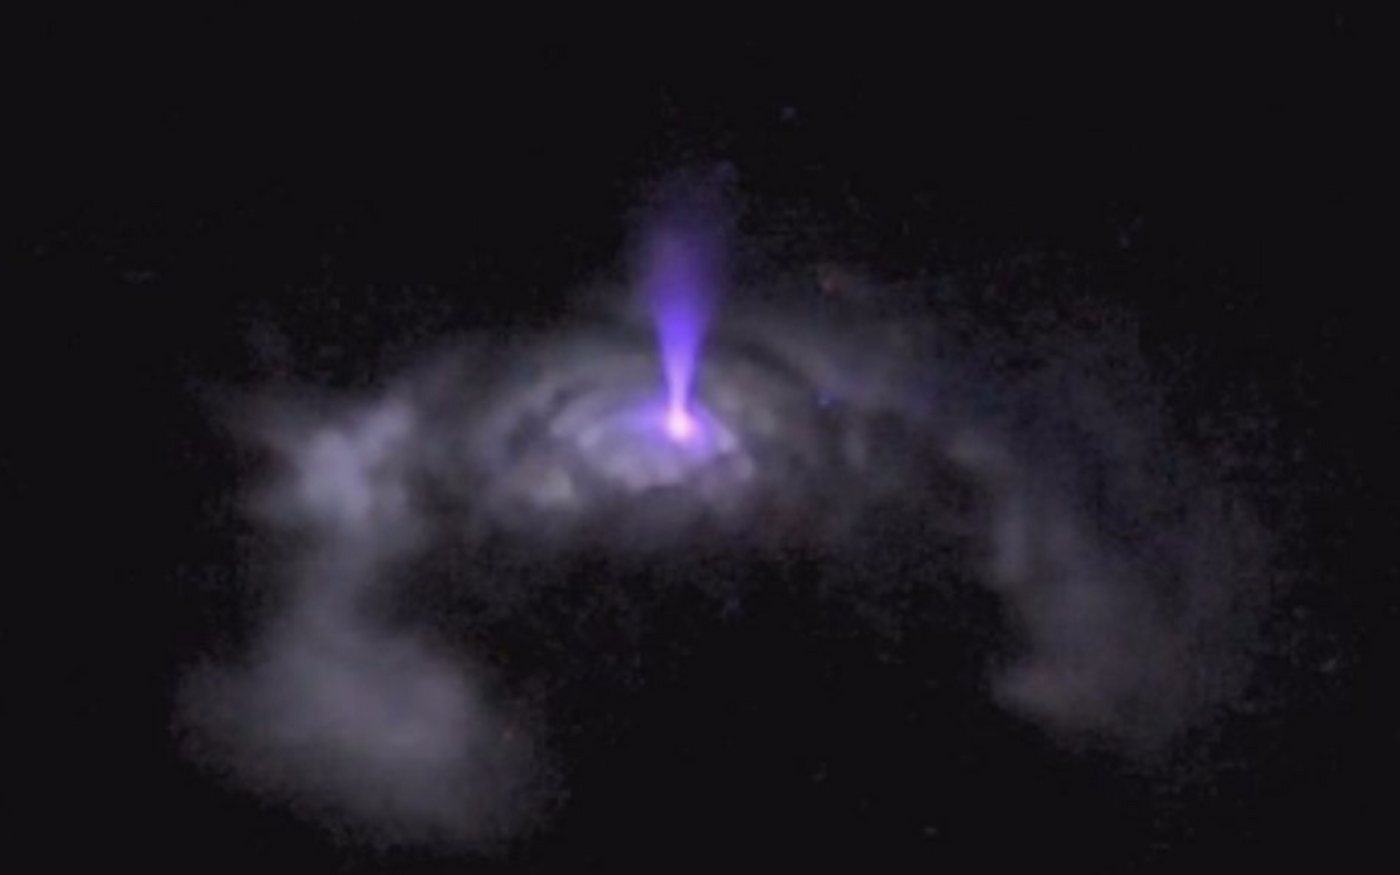 A close-up of the strange blue gets above thunderstorms on Earth, as recorded from the ISS.